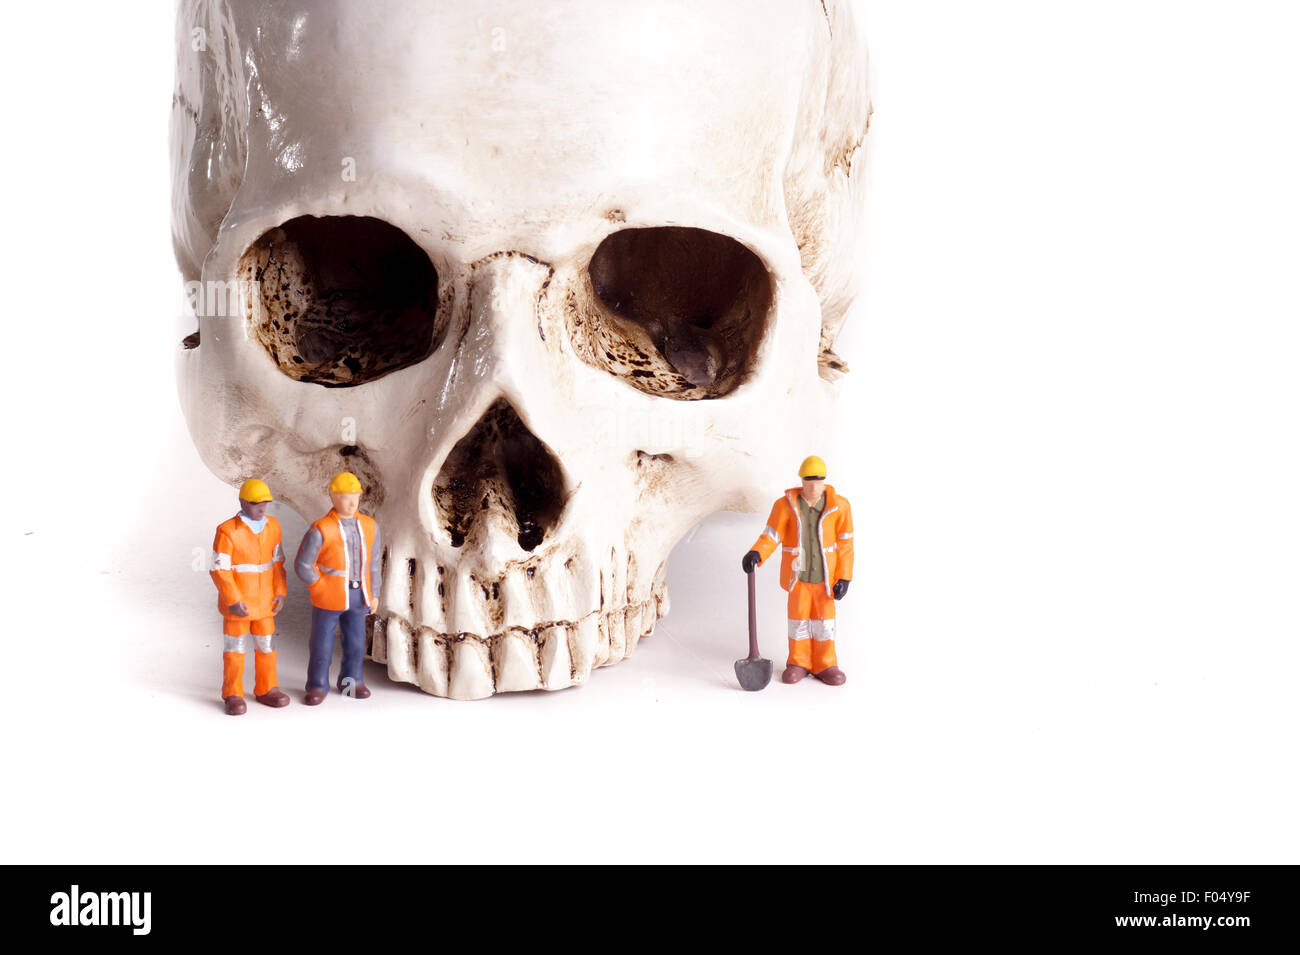 Skull and small workers, work accidents , dangerous work, take care of yourself Stock Photo